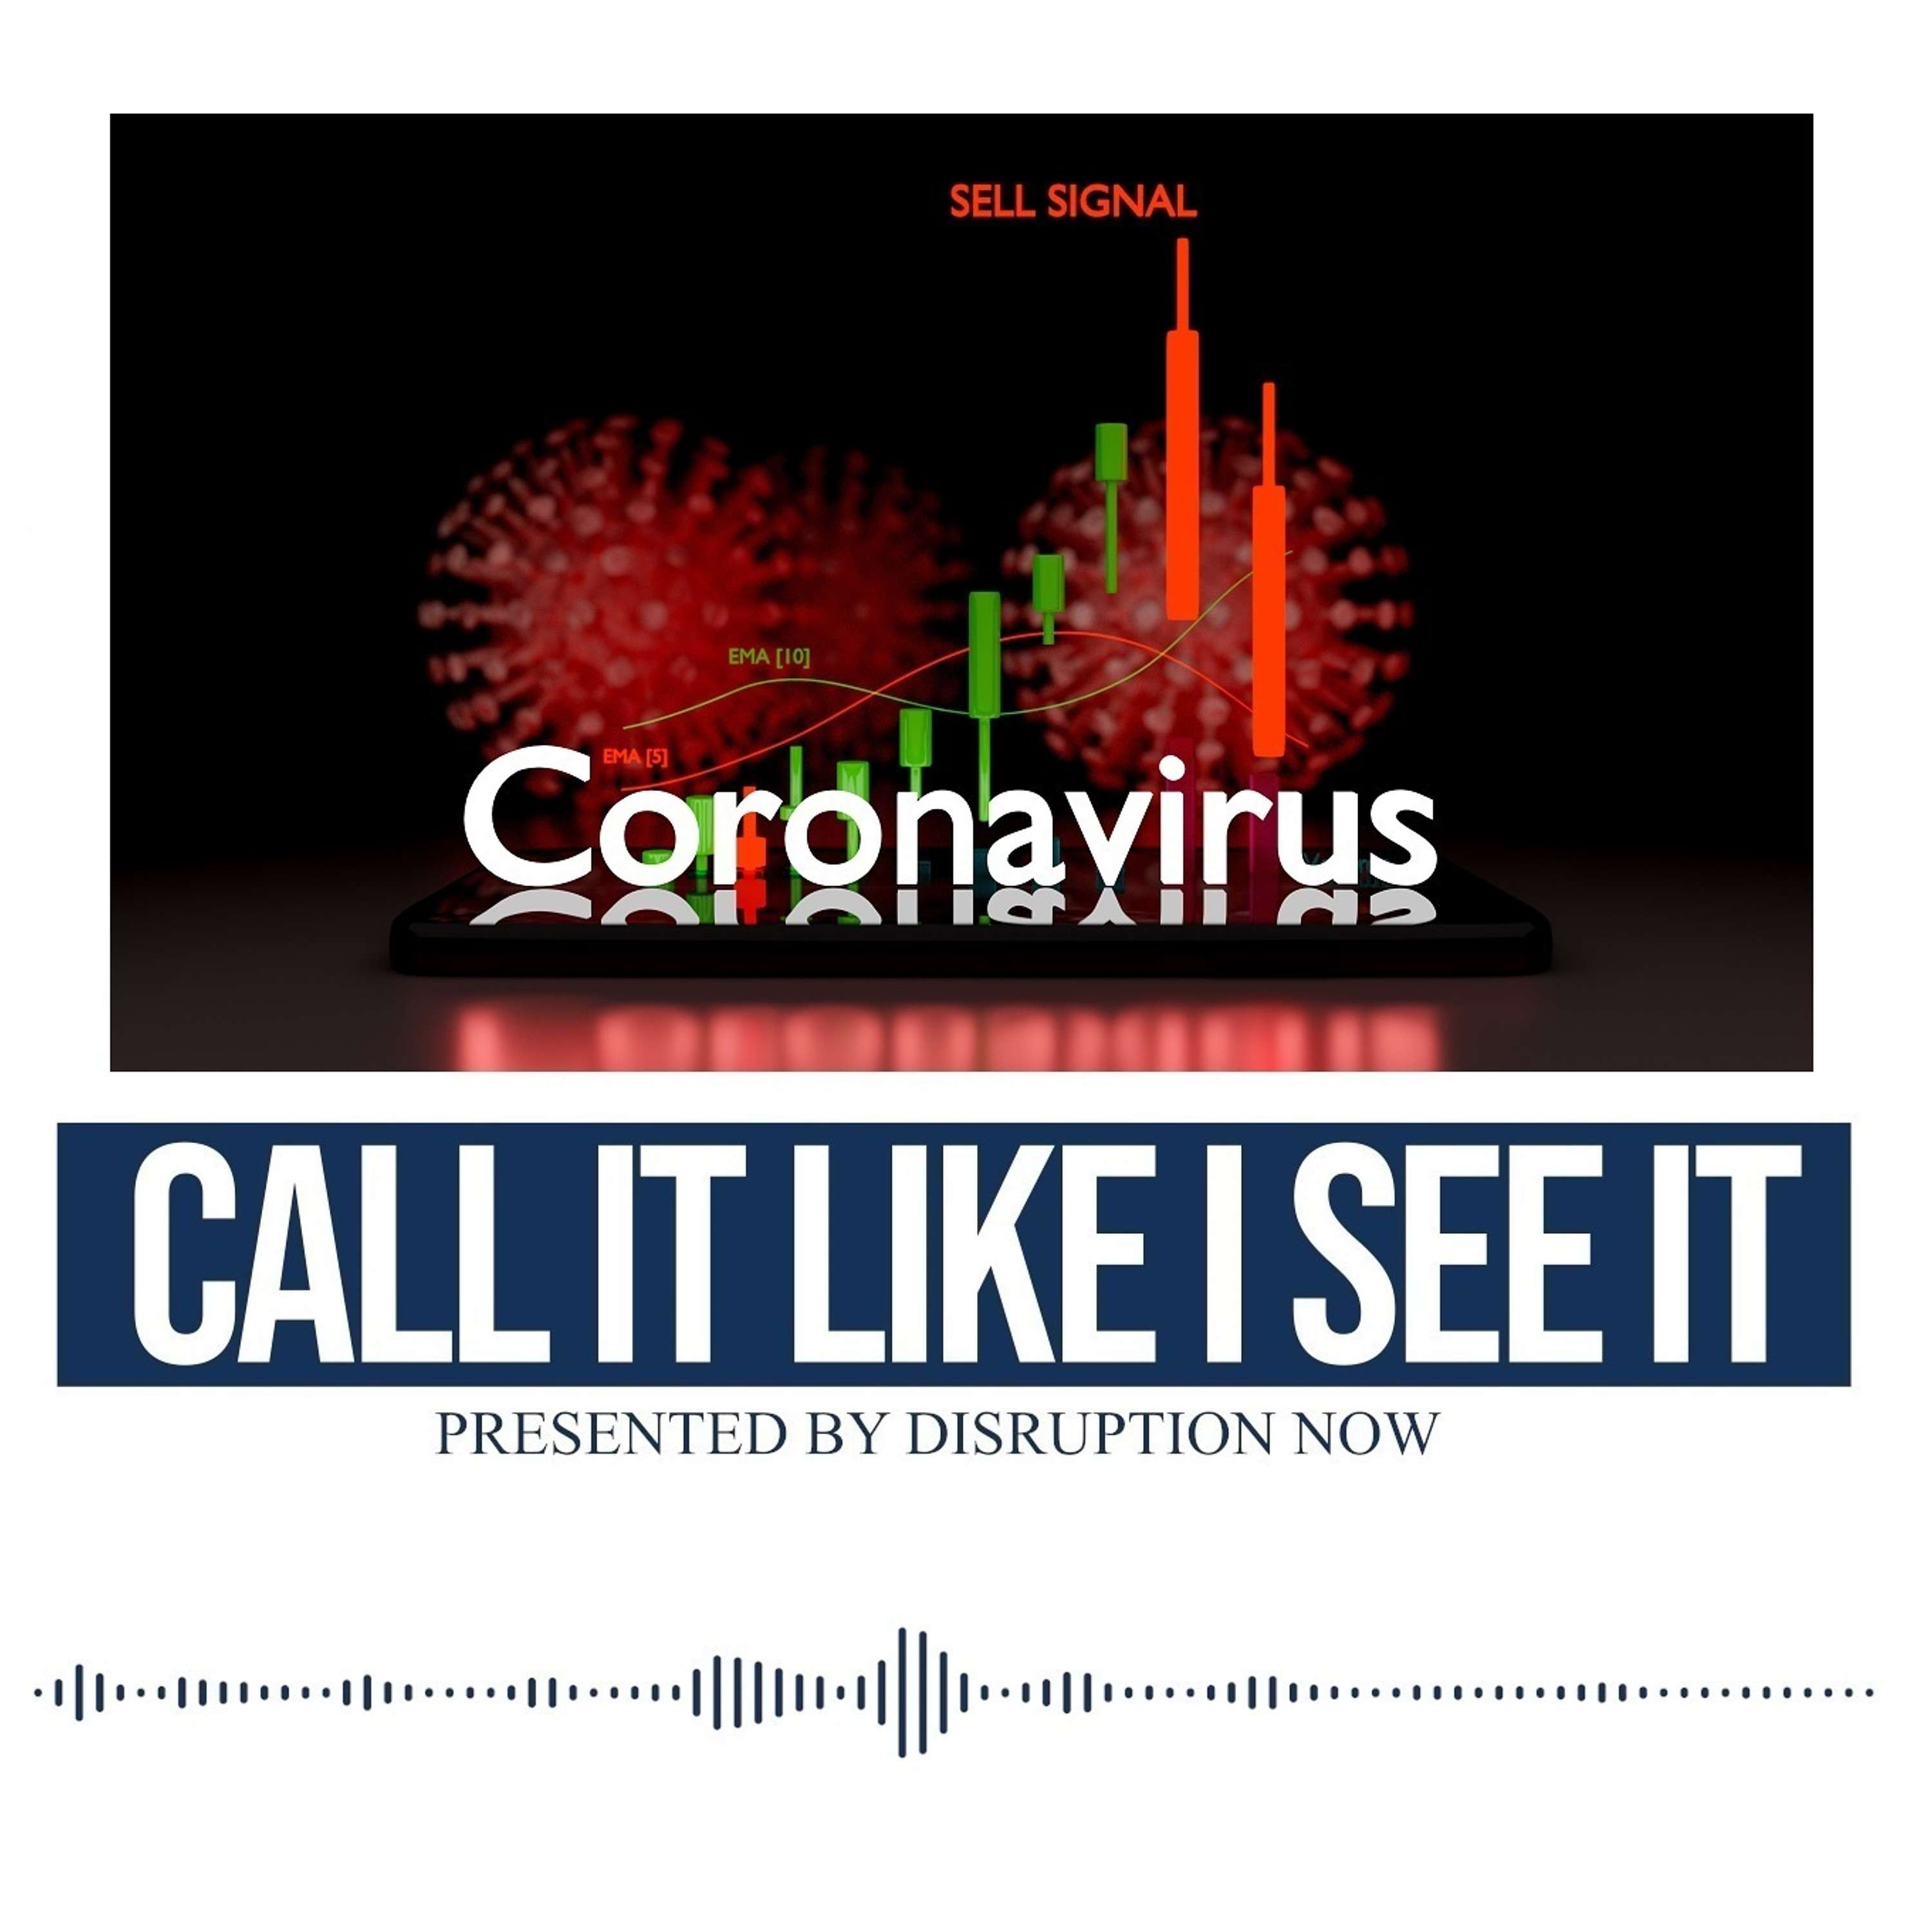 2019 Coronavirus and Primal Fear Reflected In the Market